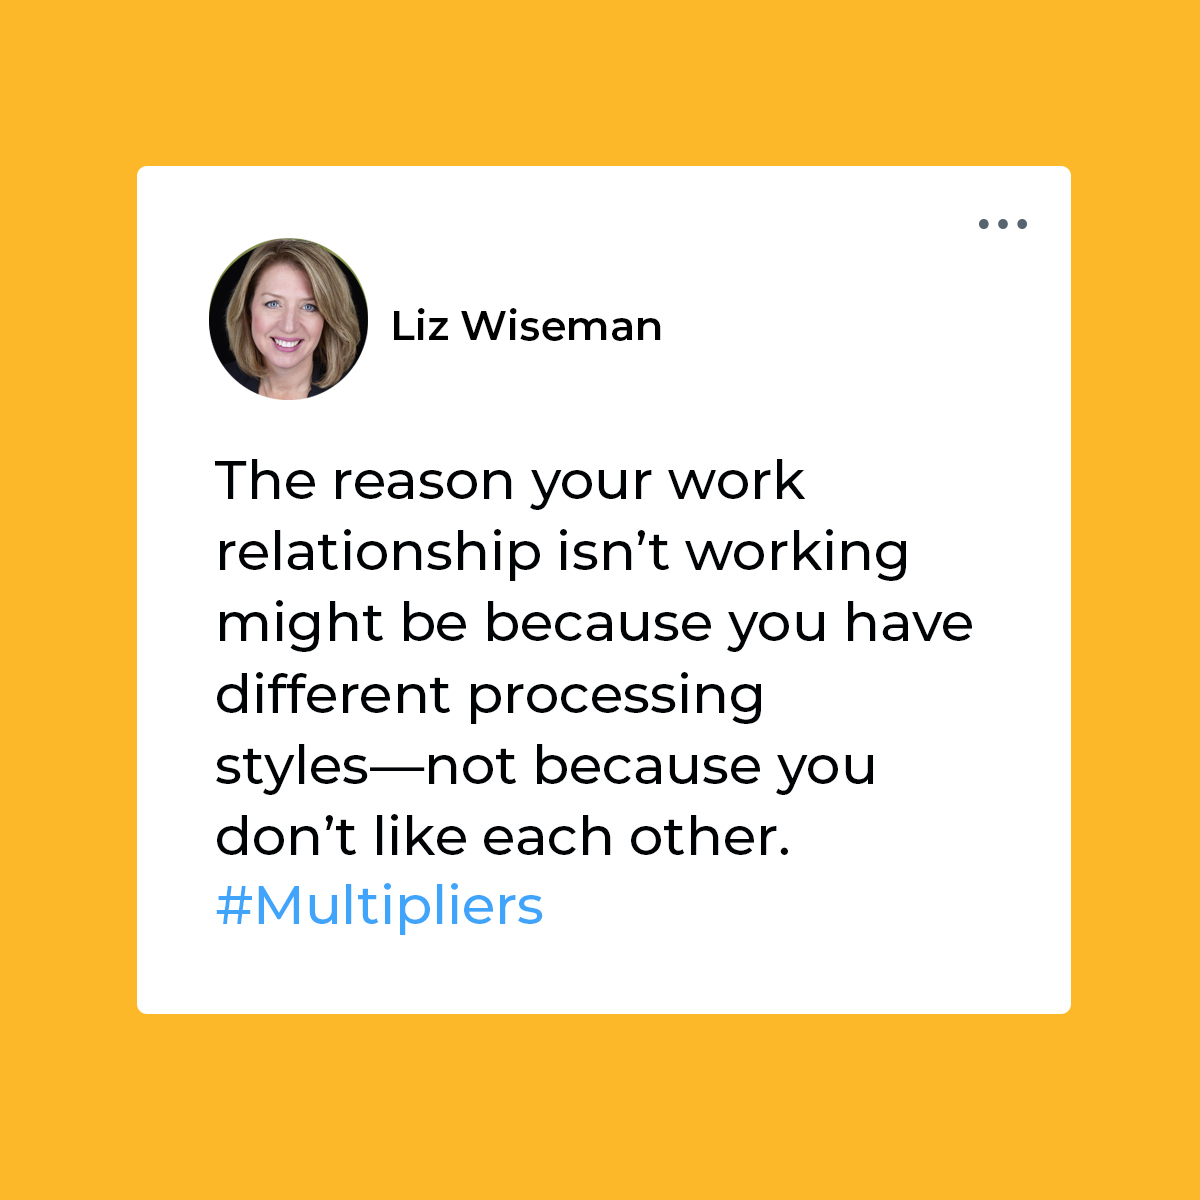 Can't connect with your boss? Foster meaningful connections with colleagues. Create a collaborative space for sharing ideas and feedback. These allies will support your advancement when your boss isn't advocating for you. #Multipliers